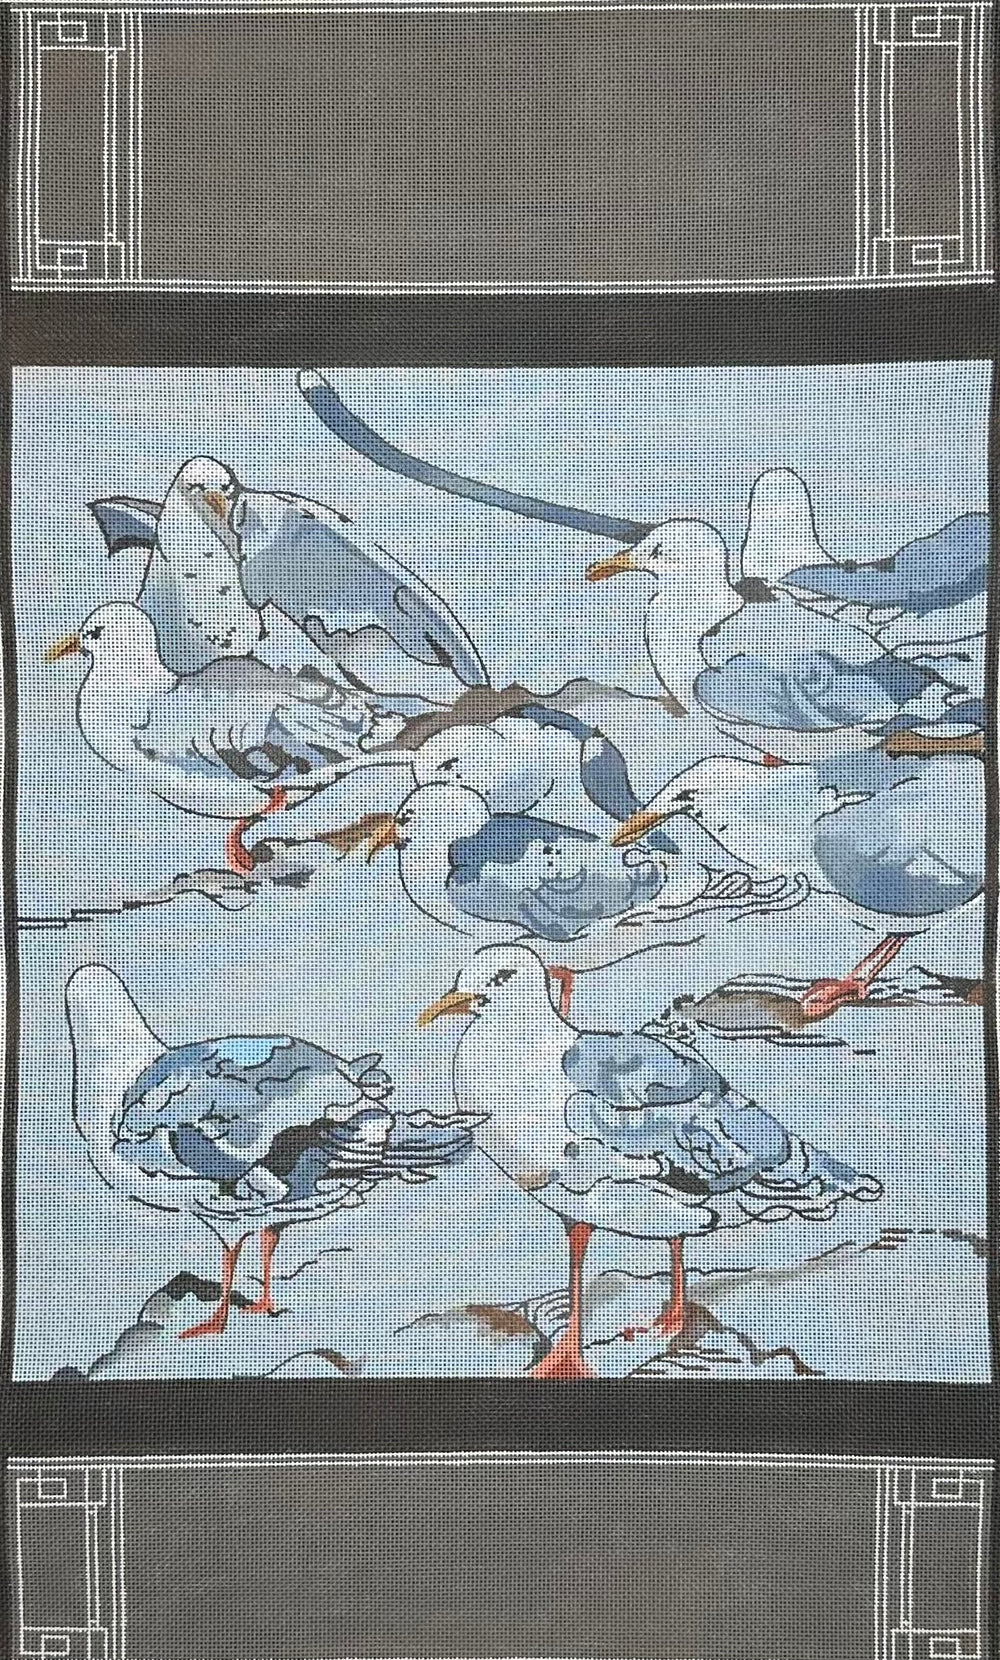 Seagulls Tapestry